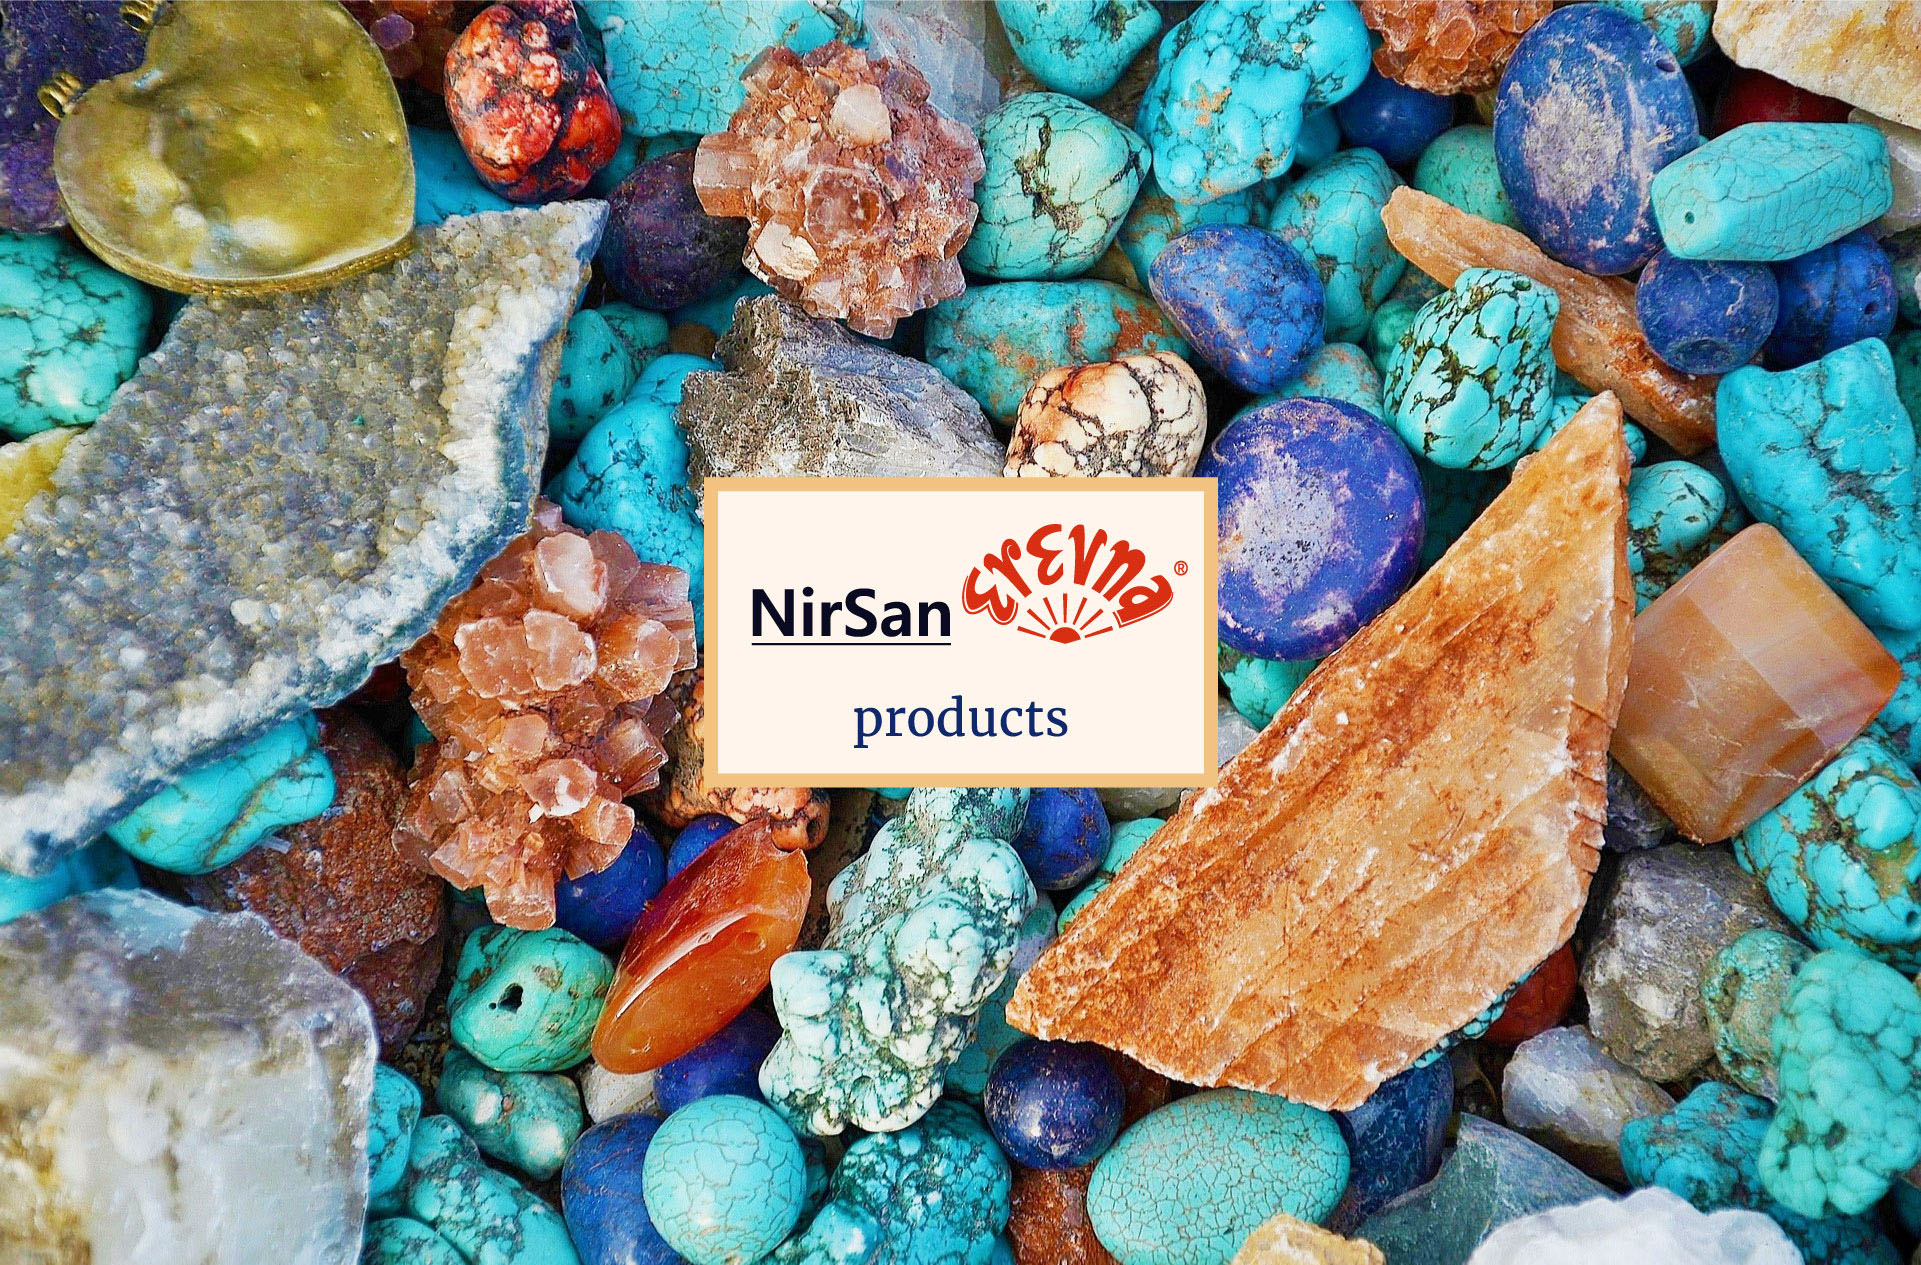 Gemstones signifying the quality of research products in NirSan Erevna for transforming performance